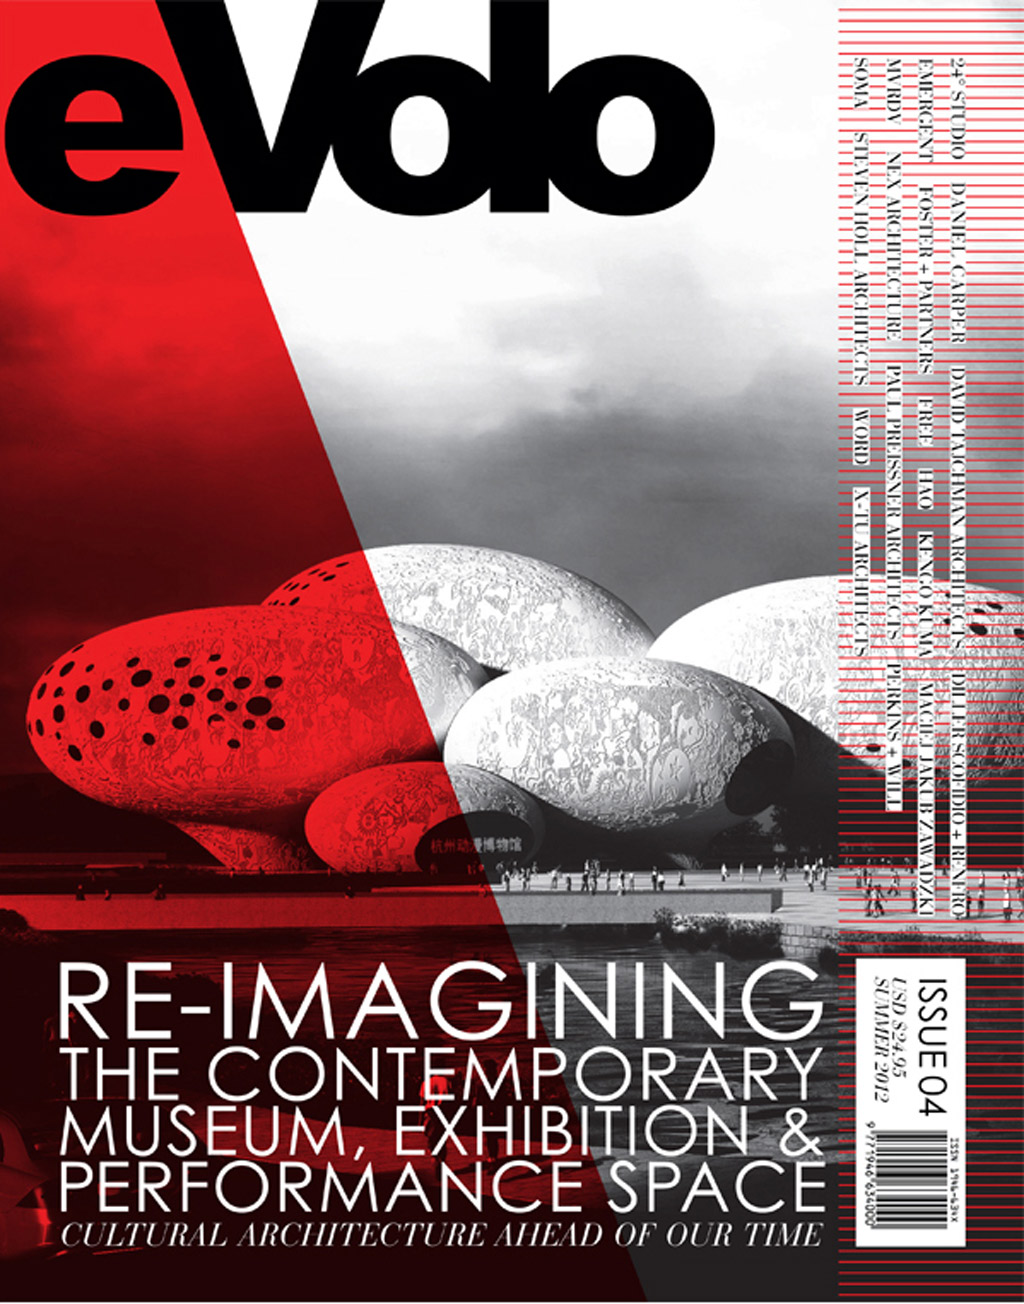 eVolo #04: Re-imagining the Contemporary Museum, Exhibition & Performance Space